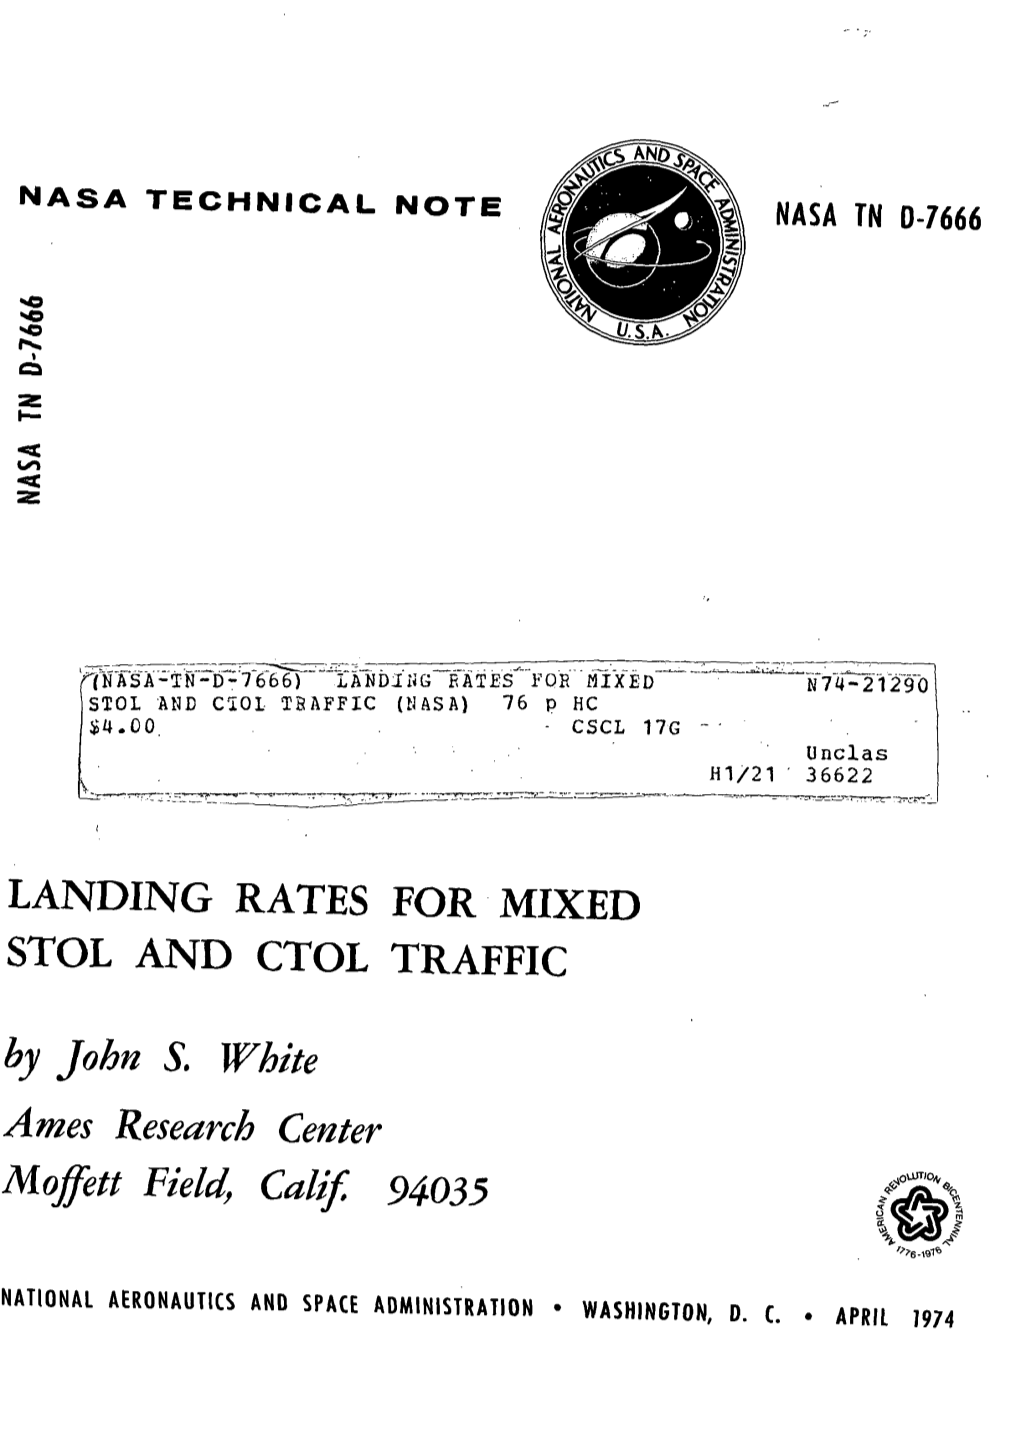 LANDING RATES for MIXED STOL and CTOL TRAFFIC by John S